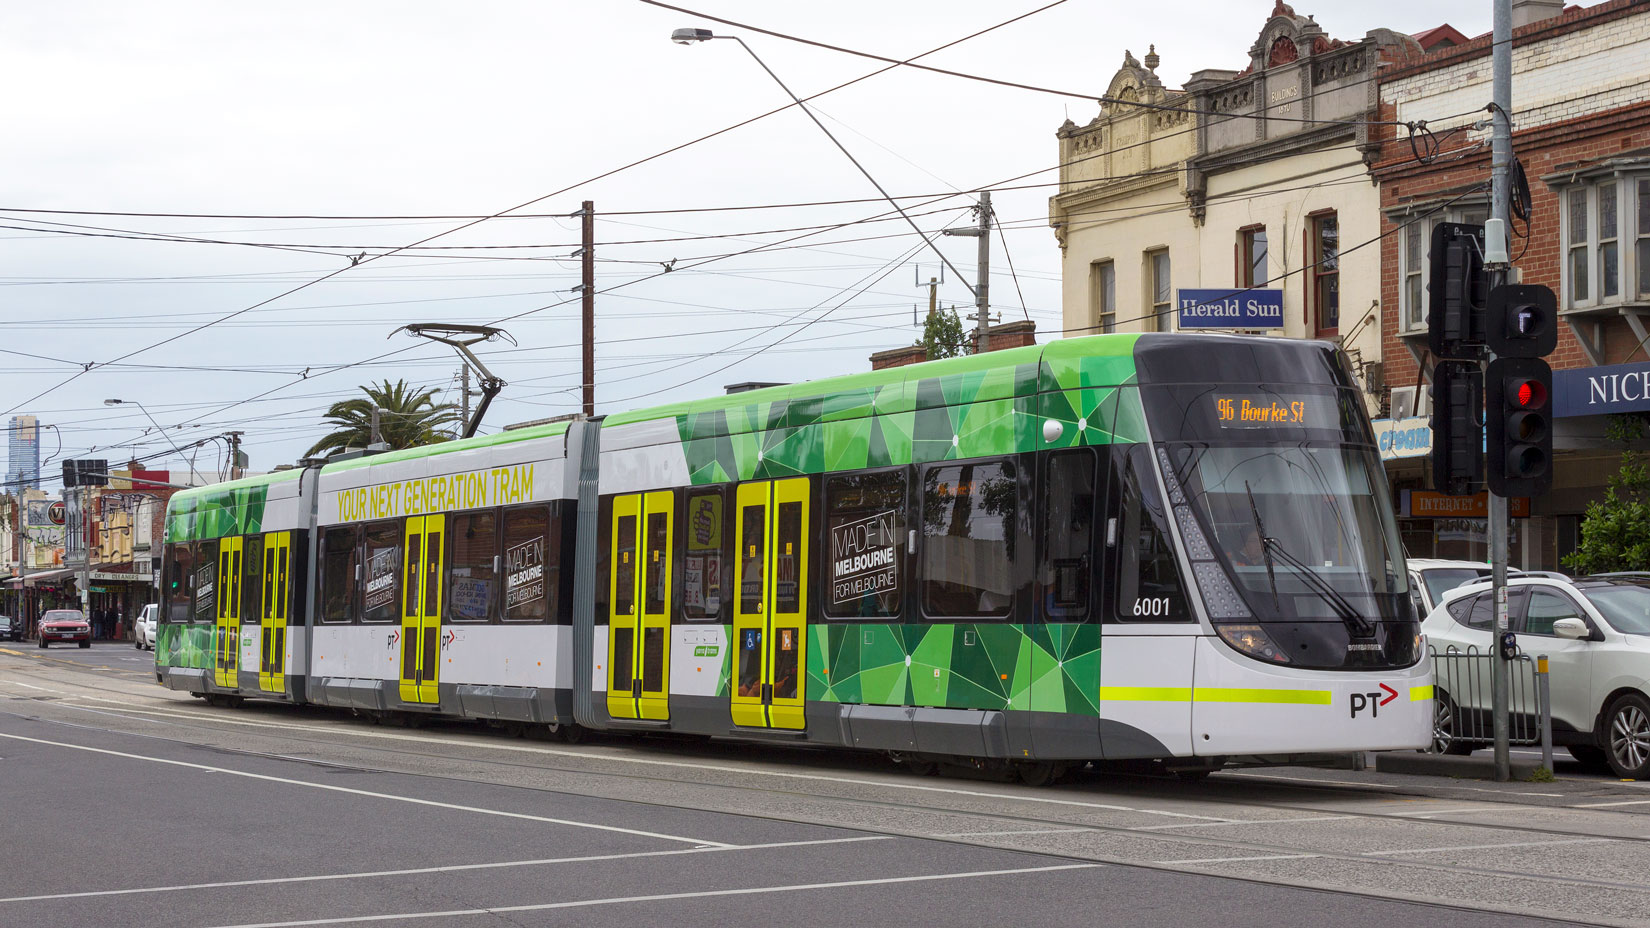 An image of the Route 96 tram travelling along Nicholson Street